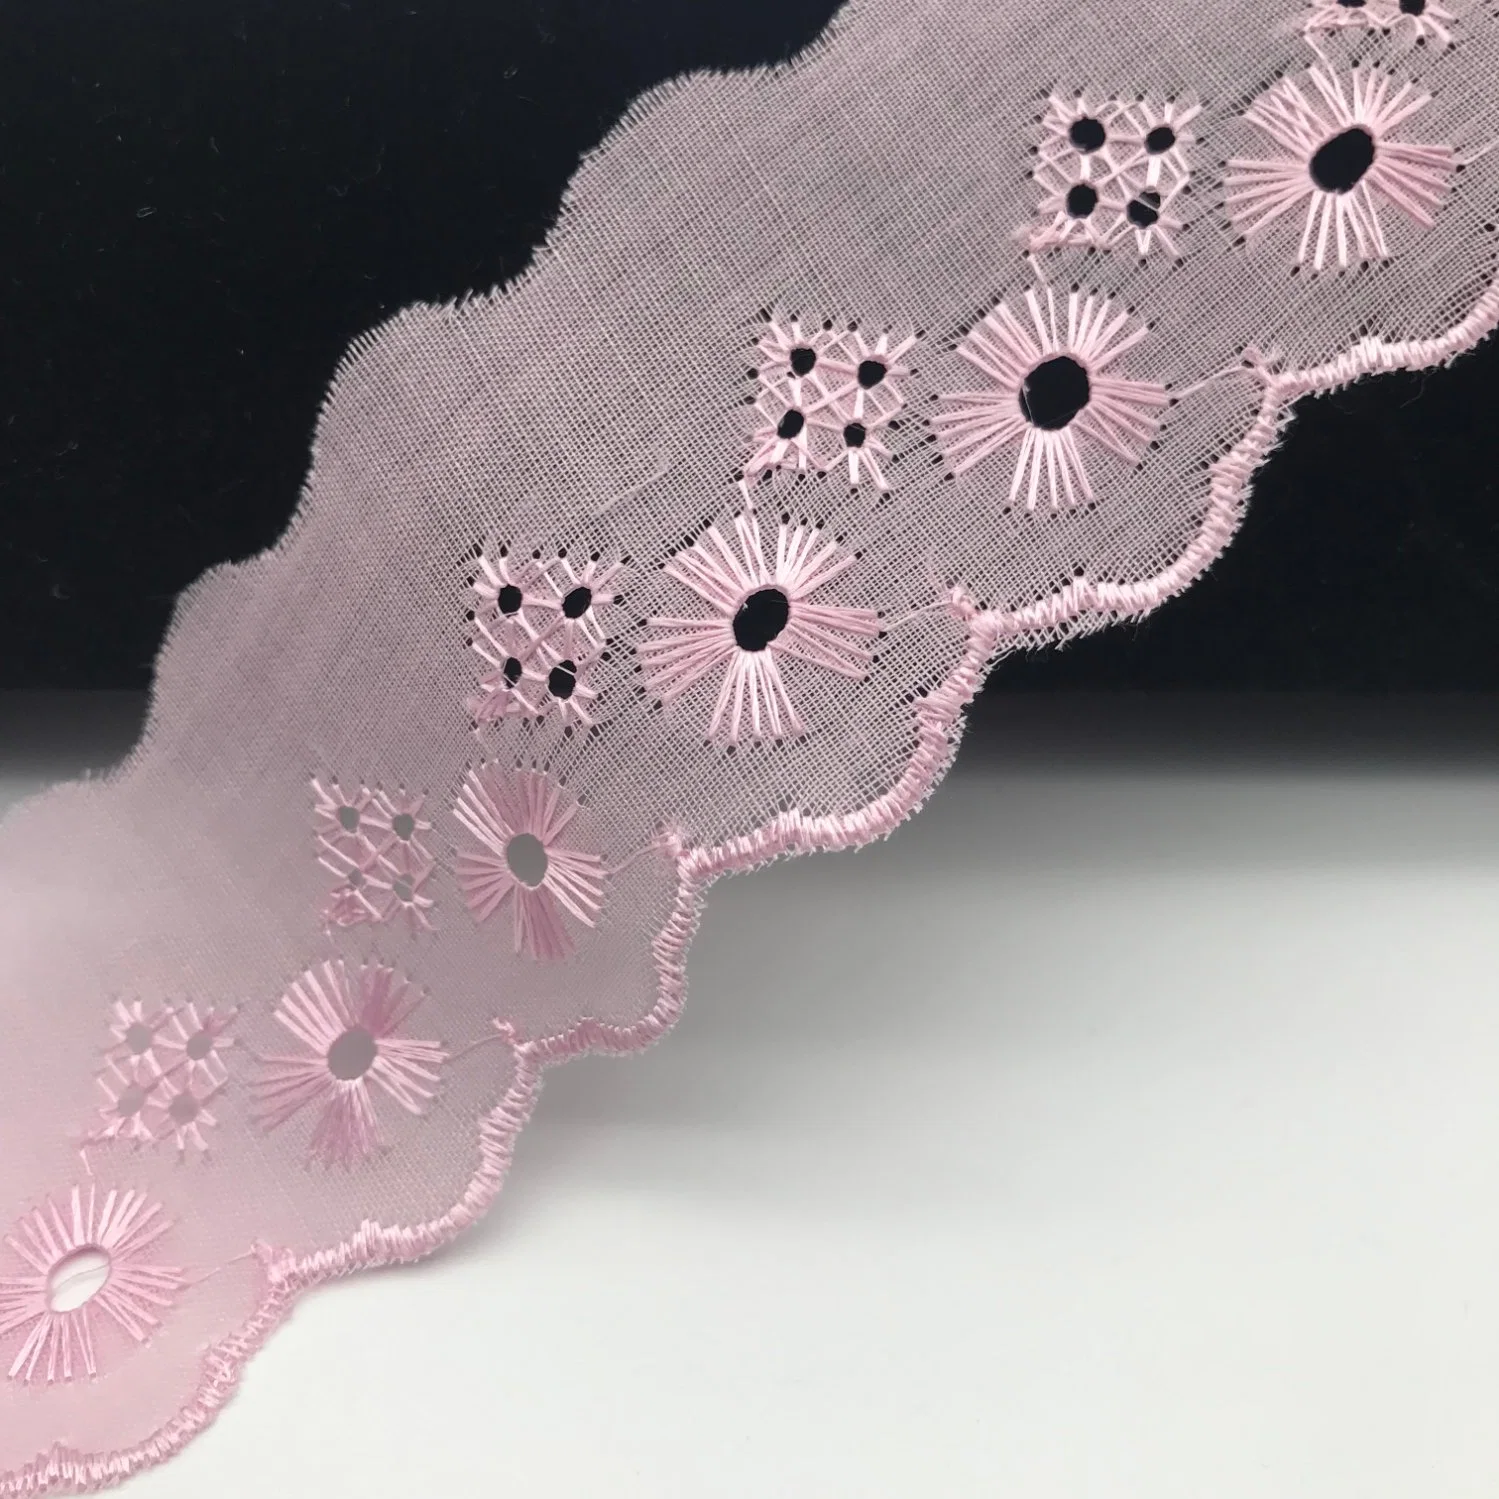 Hot Sale Embroidery Knit Textile Apparel Fashion Accessories Fast Delivery Tc Cotton Polyester Lace Fabric for Dubai African Wedding Dress Lace